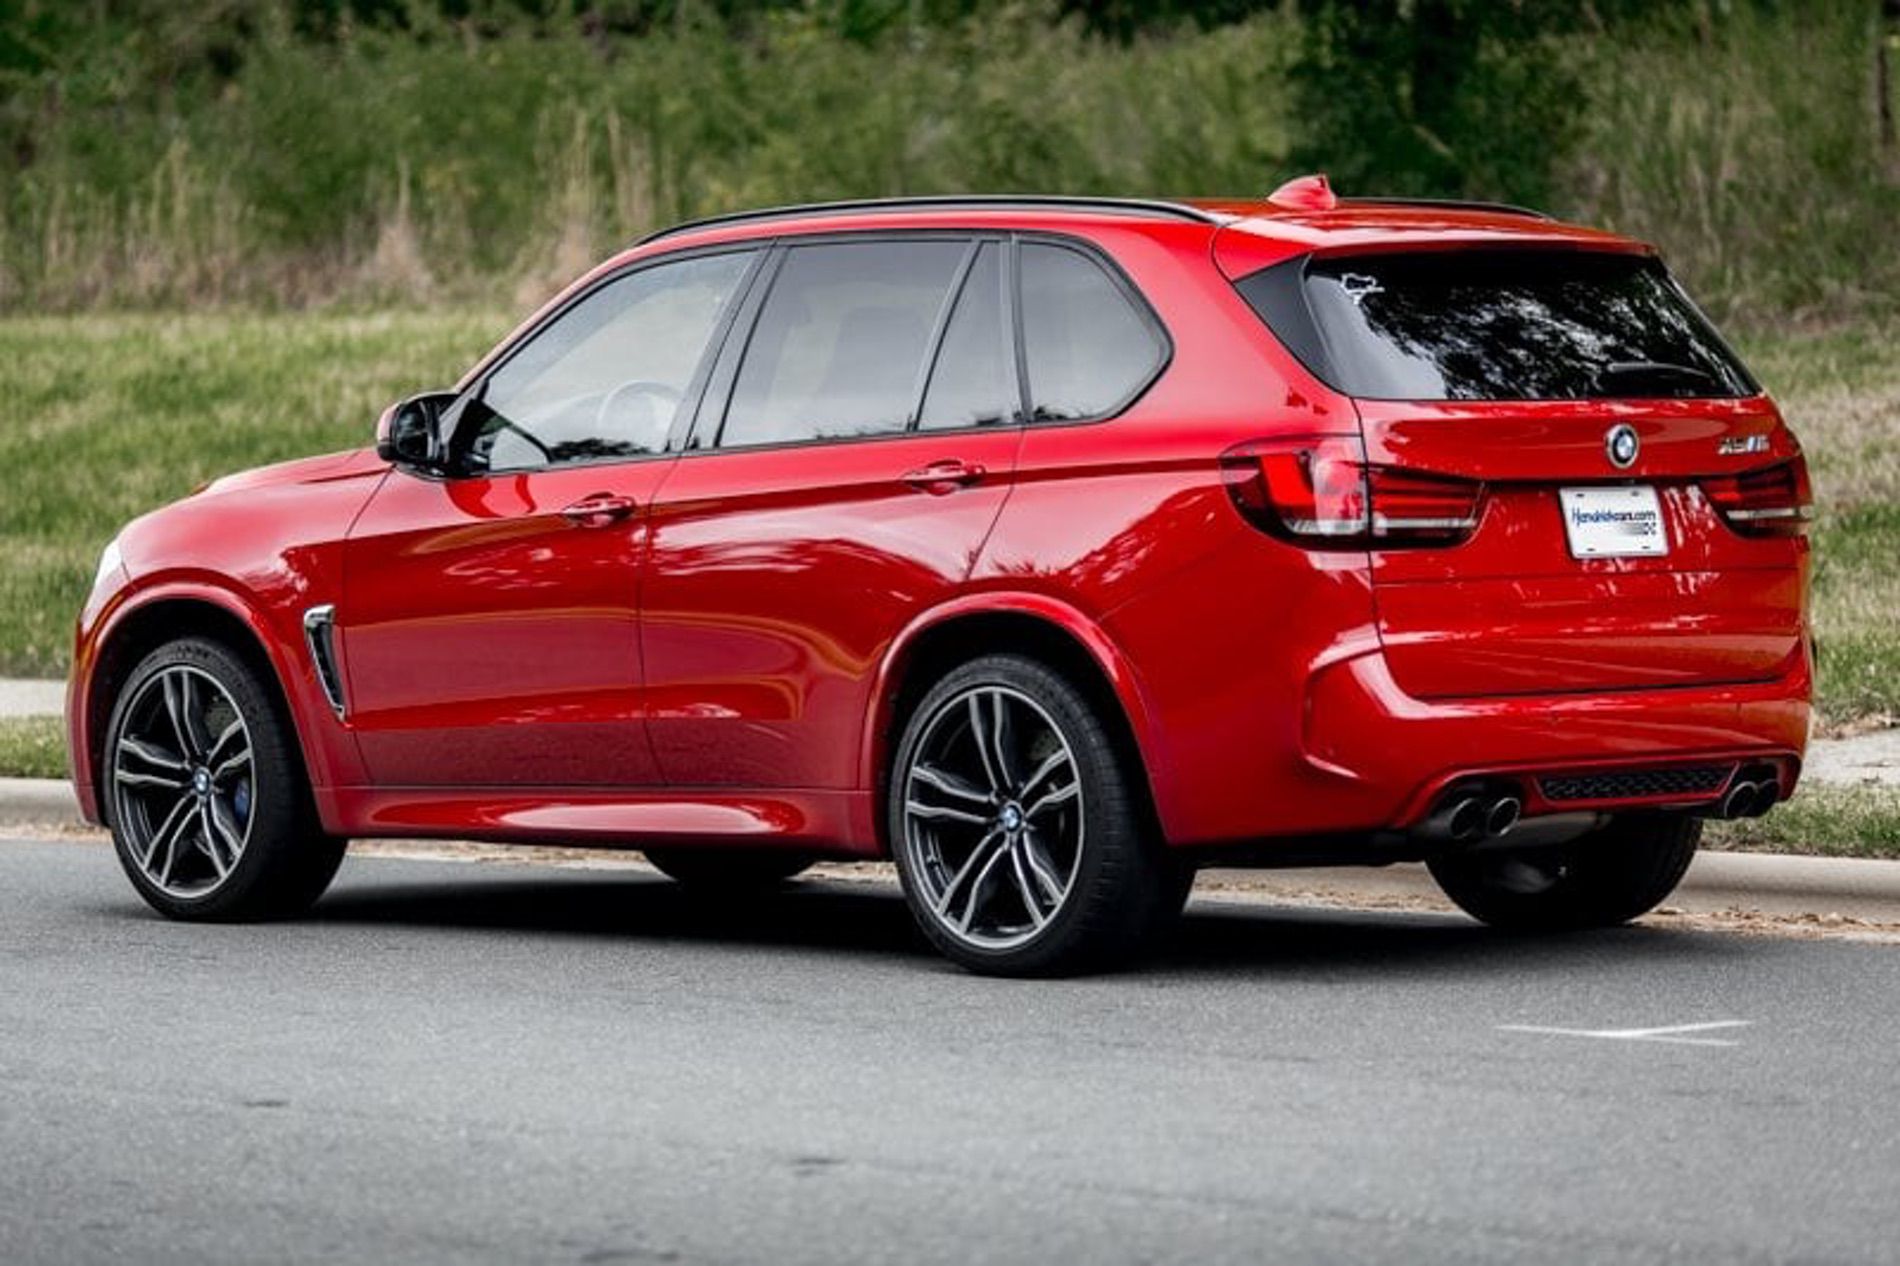 Stunning 2016 BMW X5 M in Melbourne Red Metallic is up for sale